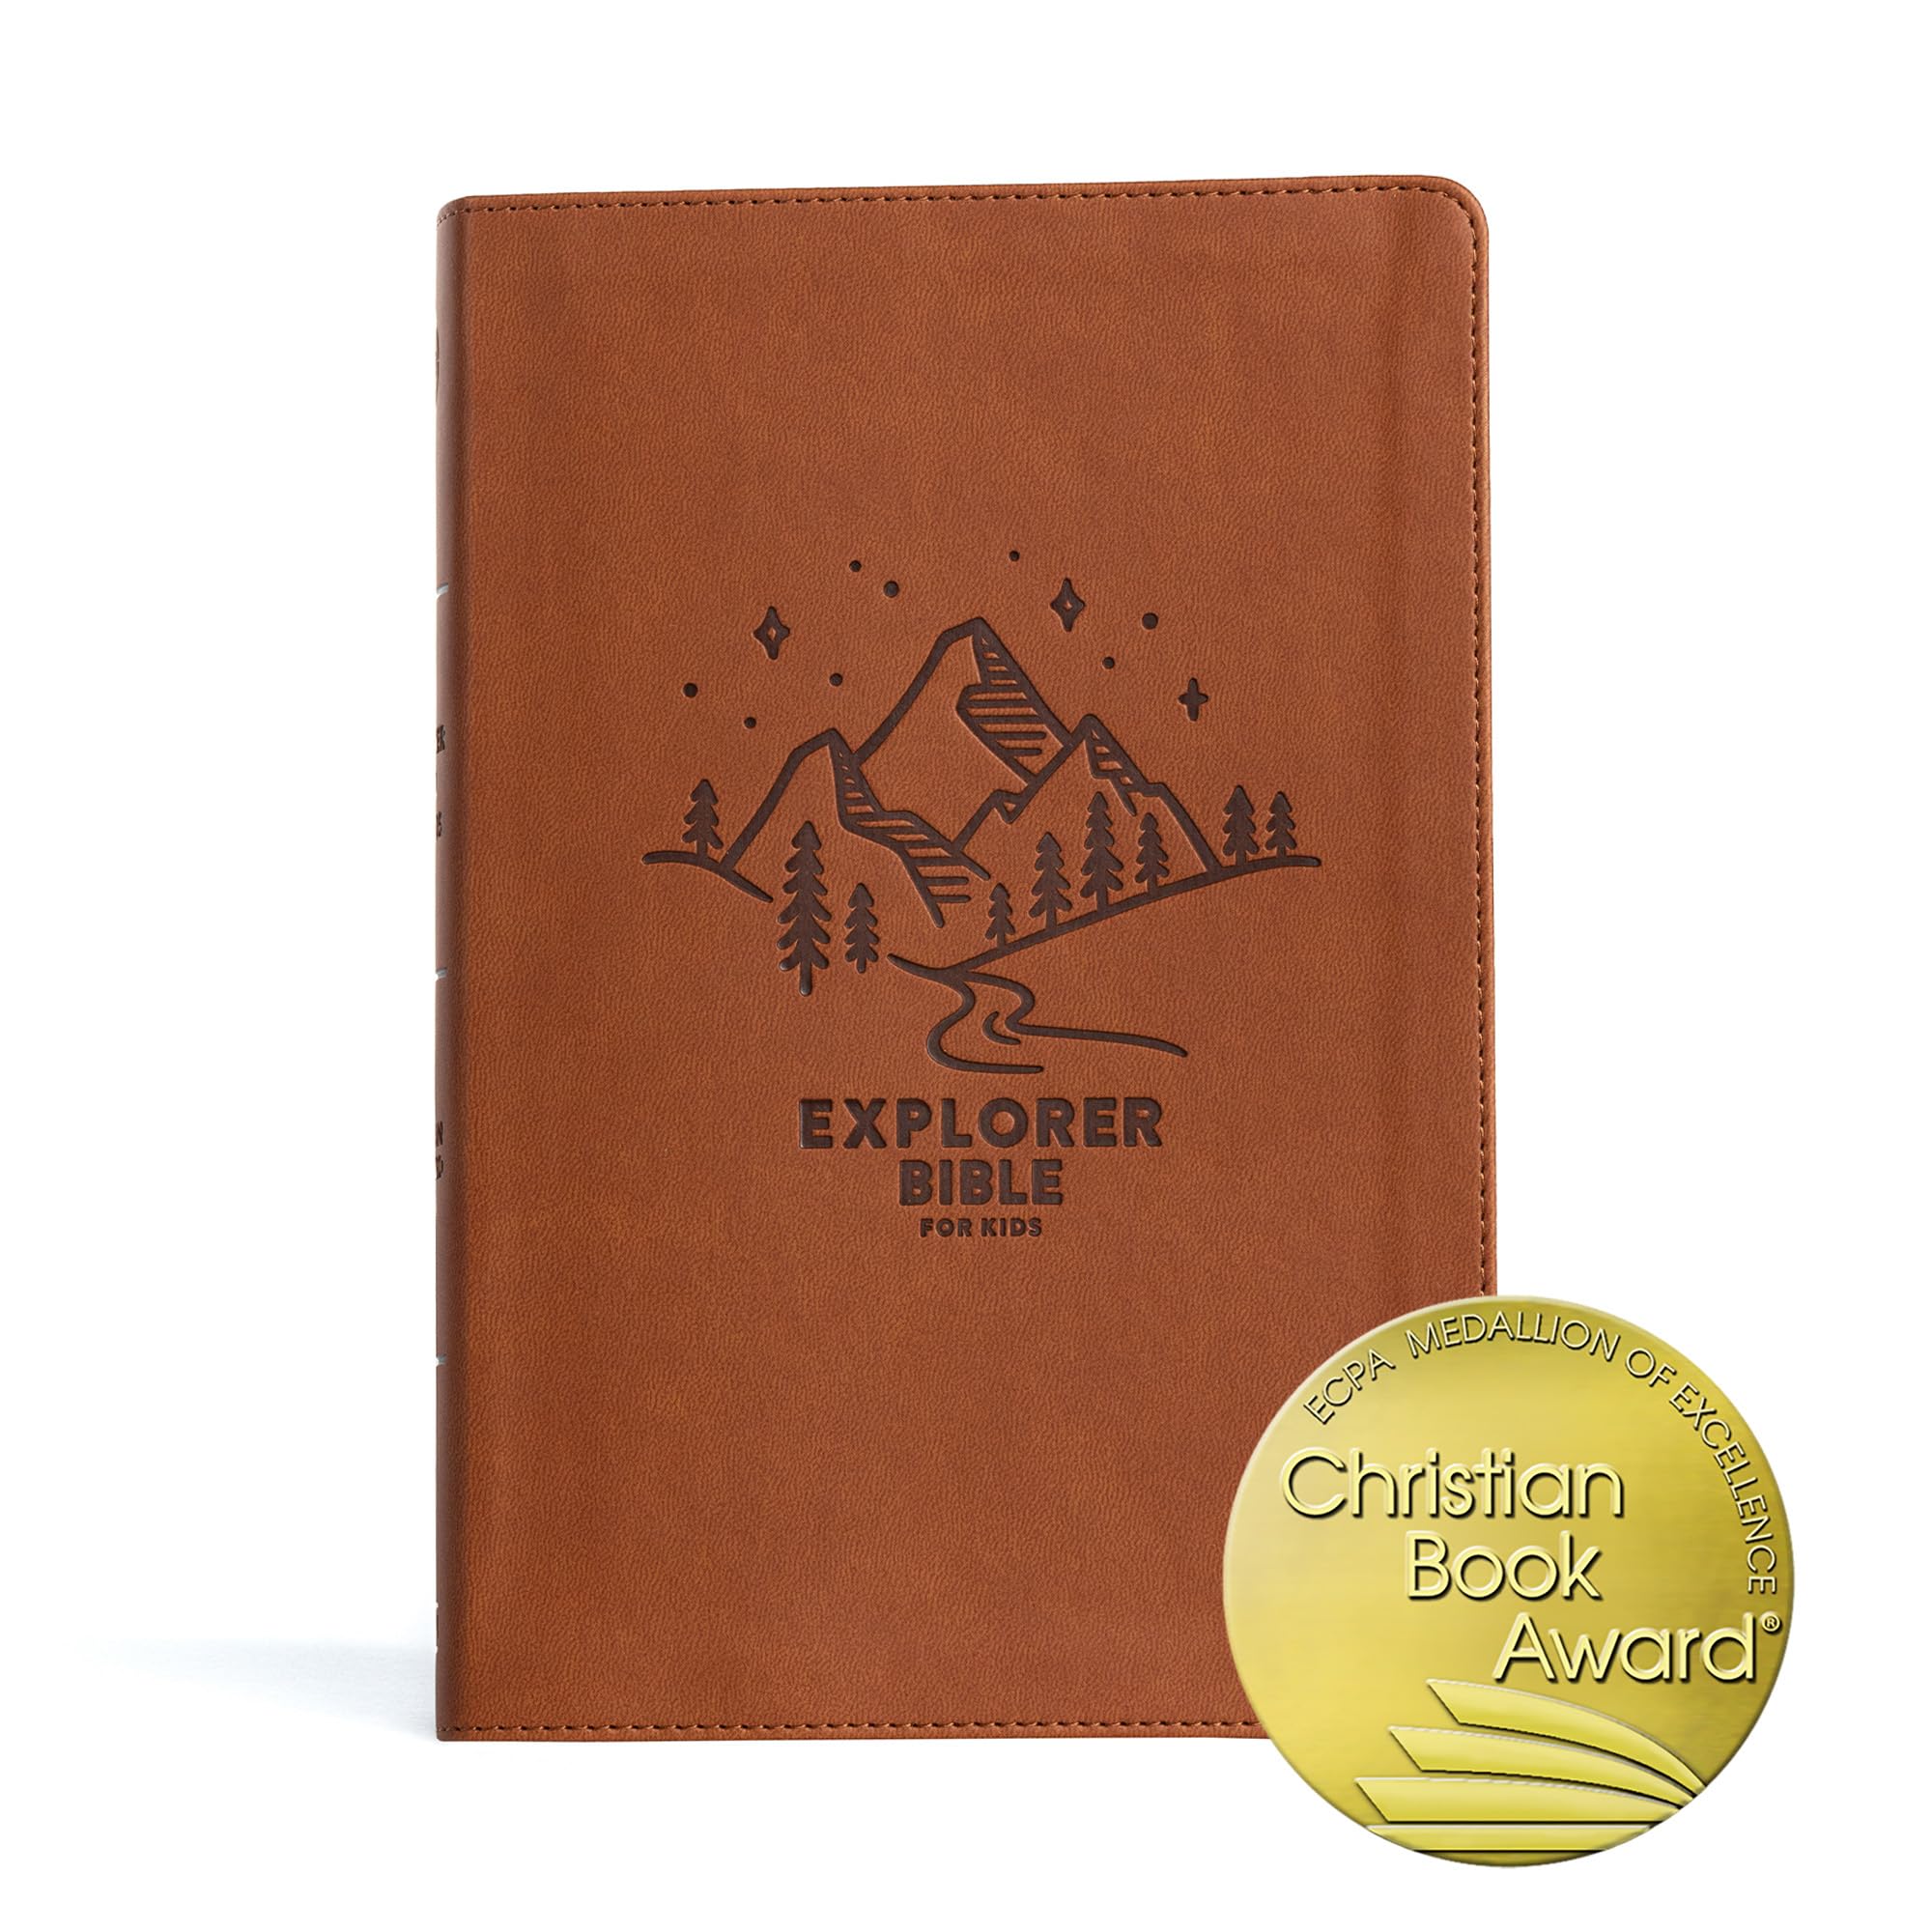 CSB Explorer Bible for Kids, Brown Mountains LeatherTouch, Red Letter, Full-Color Design, Photos, Illustrations, Charts, Videos, Activities, Easy-to-Read Bible Serif Type